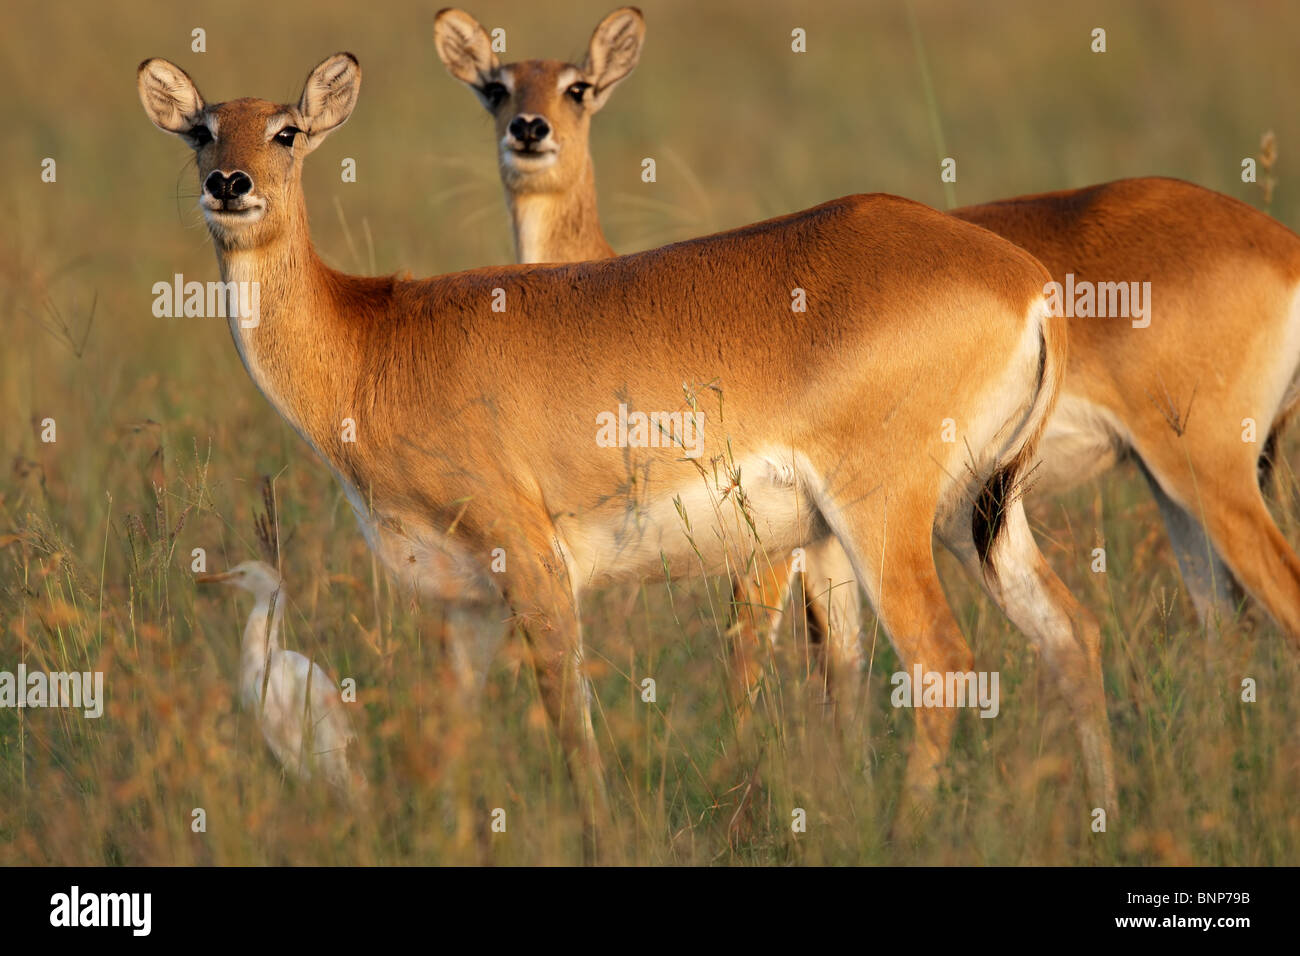 Two female red lechwe antelopes (Kobus leche), southern Africa Stock Photo